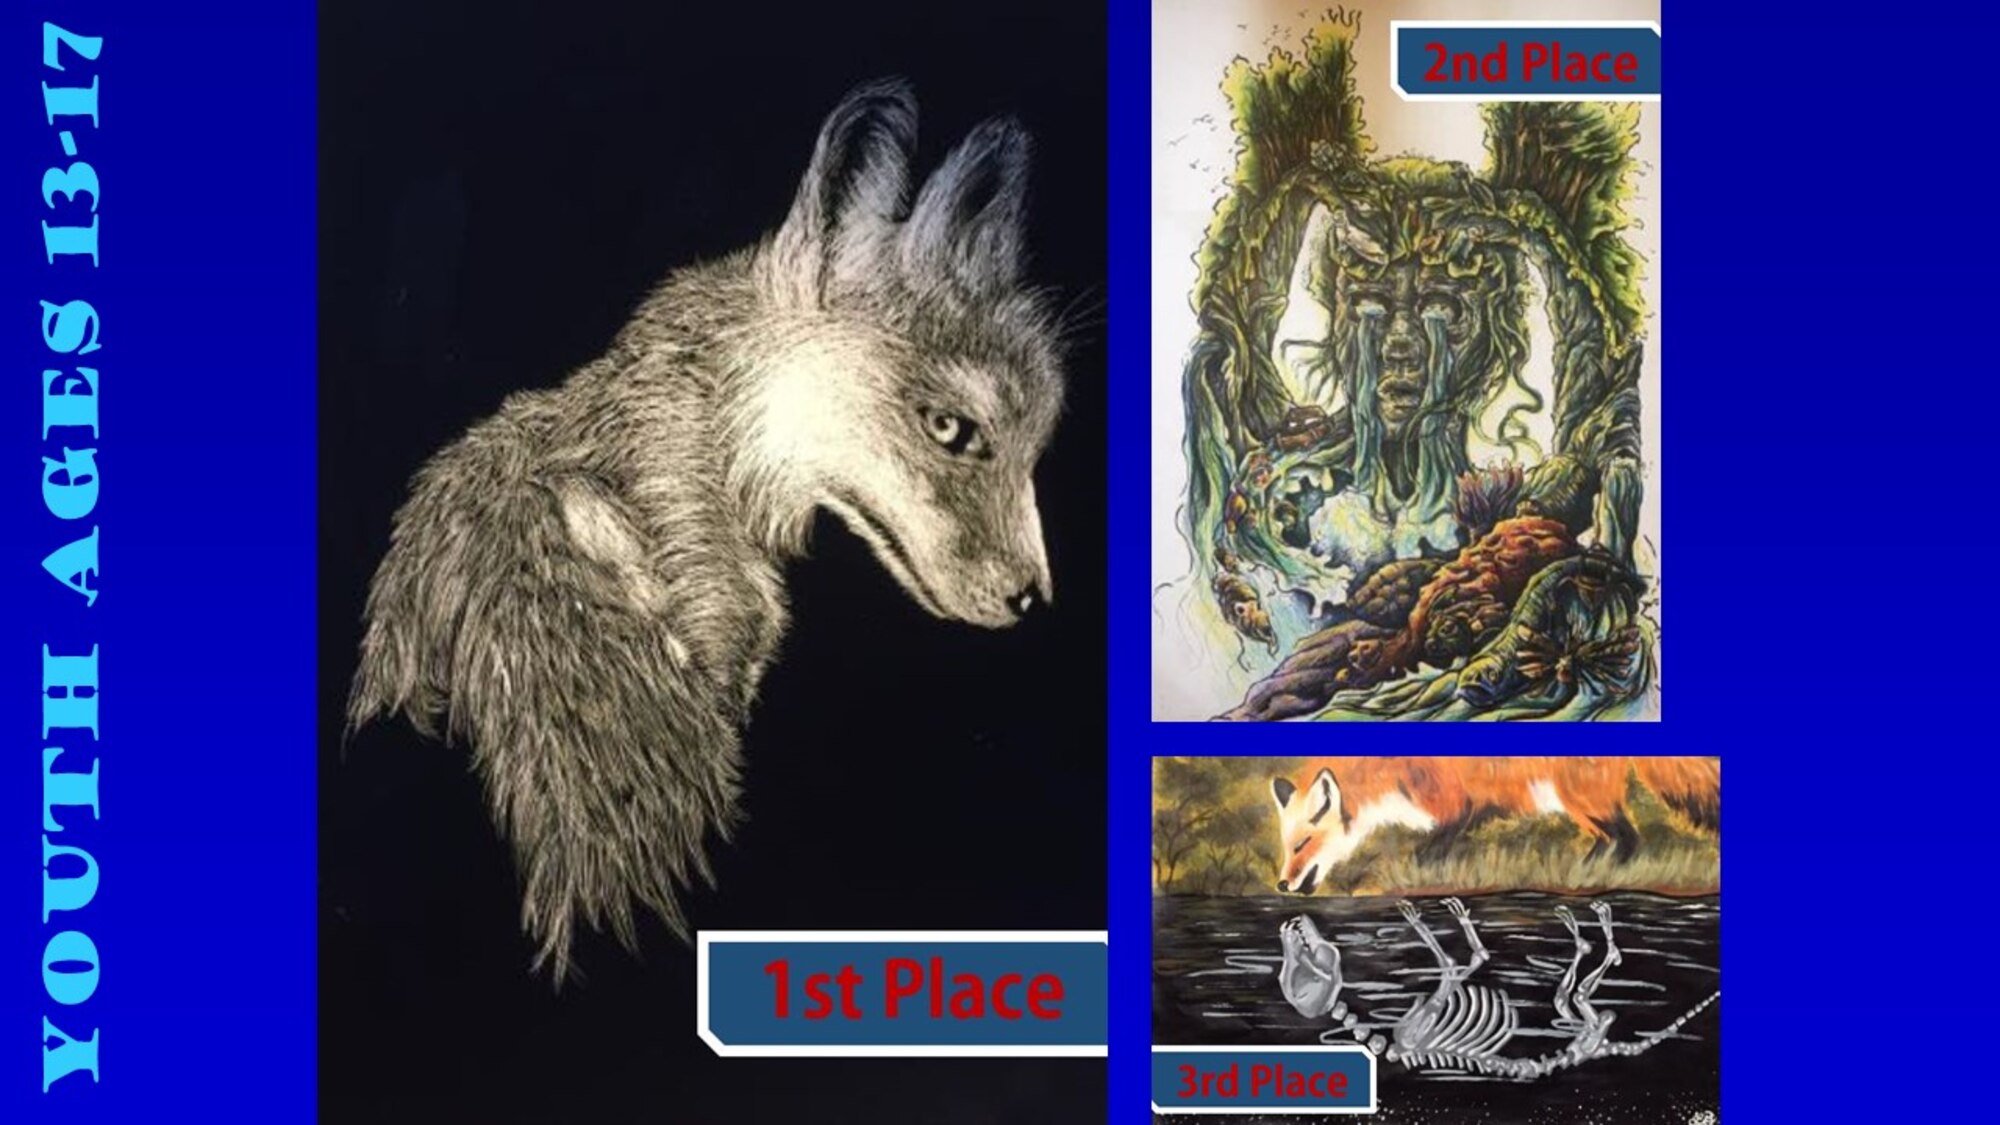 Congratulations to the 2019 Air Force Art Contest winners, ages 13-17. (U.S. Air Force graphic using winning art work)